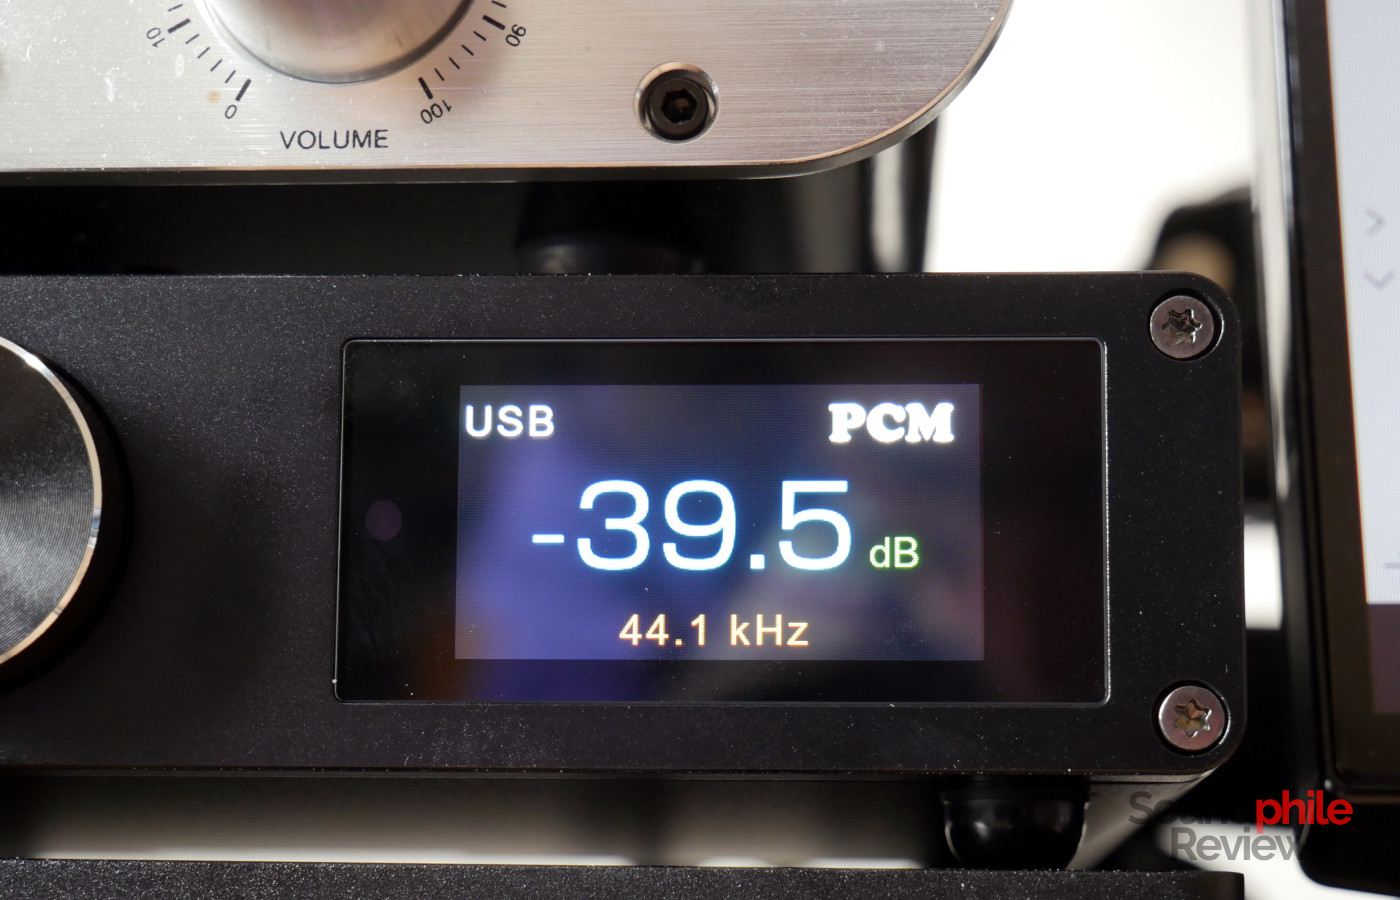 The SMSL DO200 MKII's LCD display